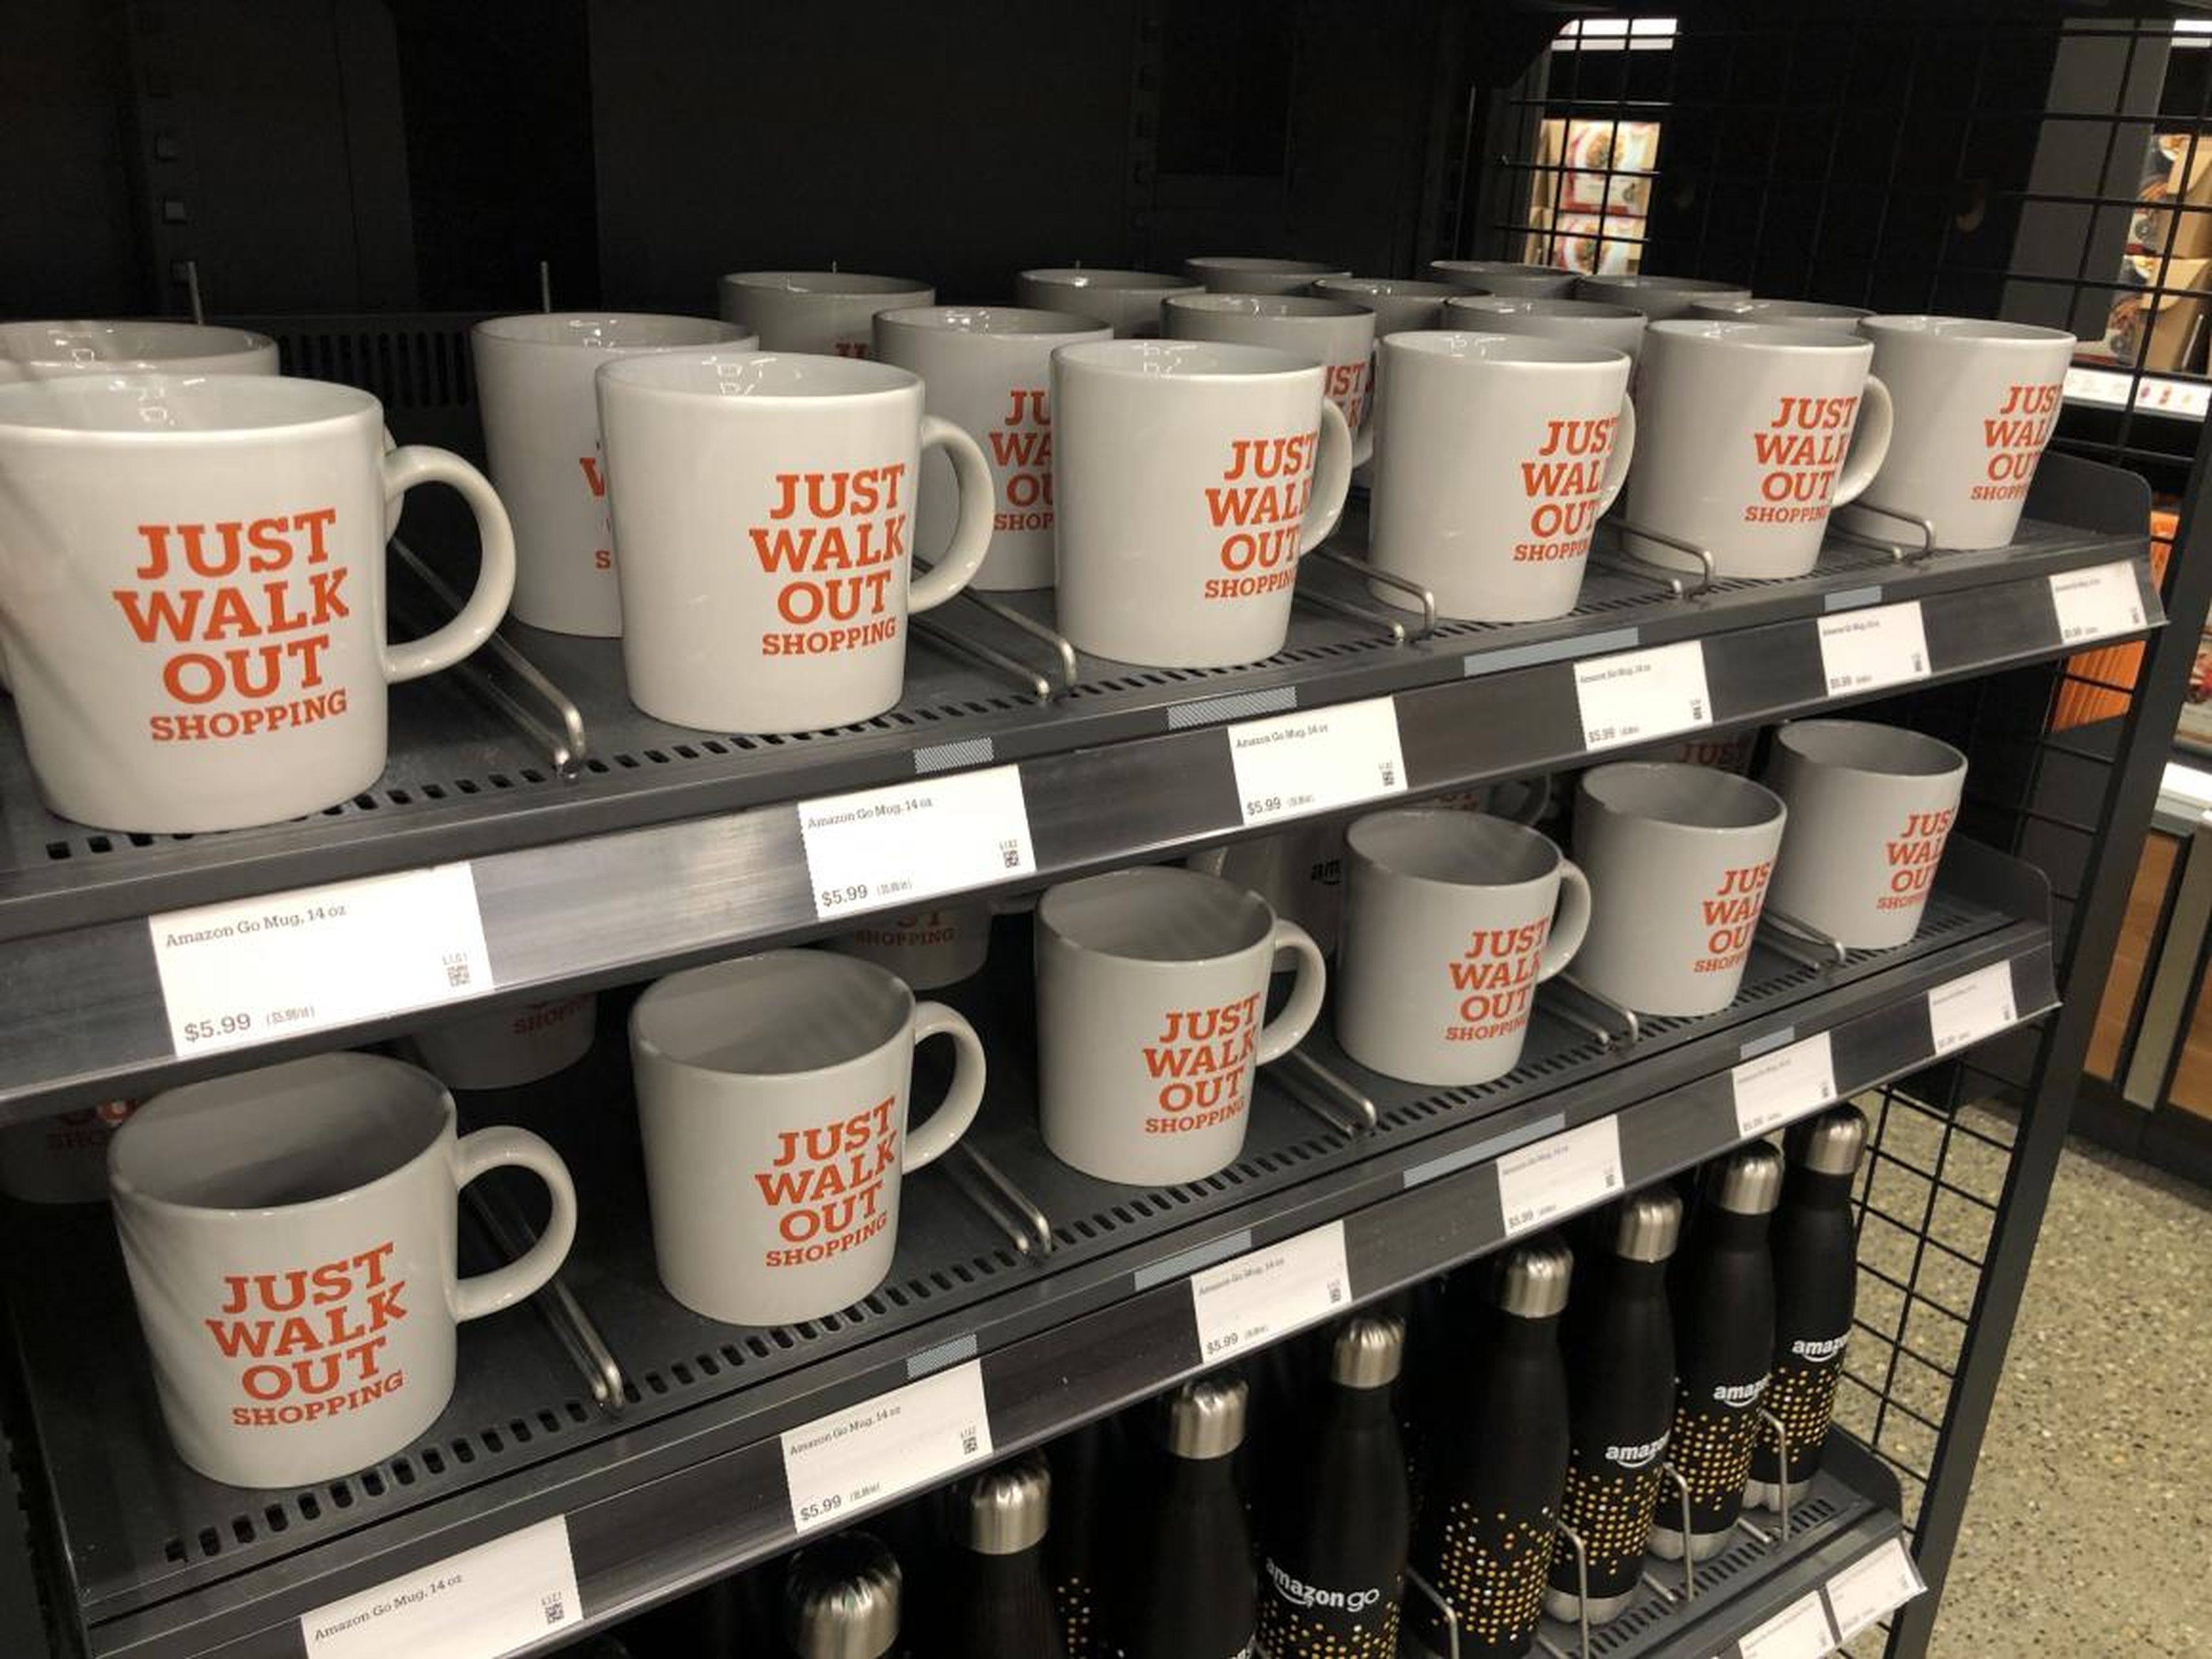 If you're dying to buy a souvenir, there are mugs ...